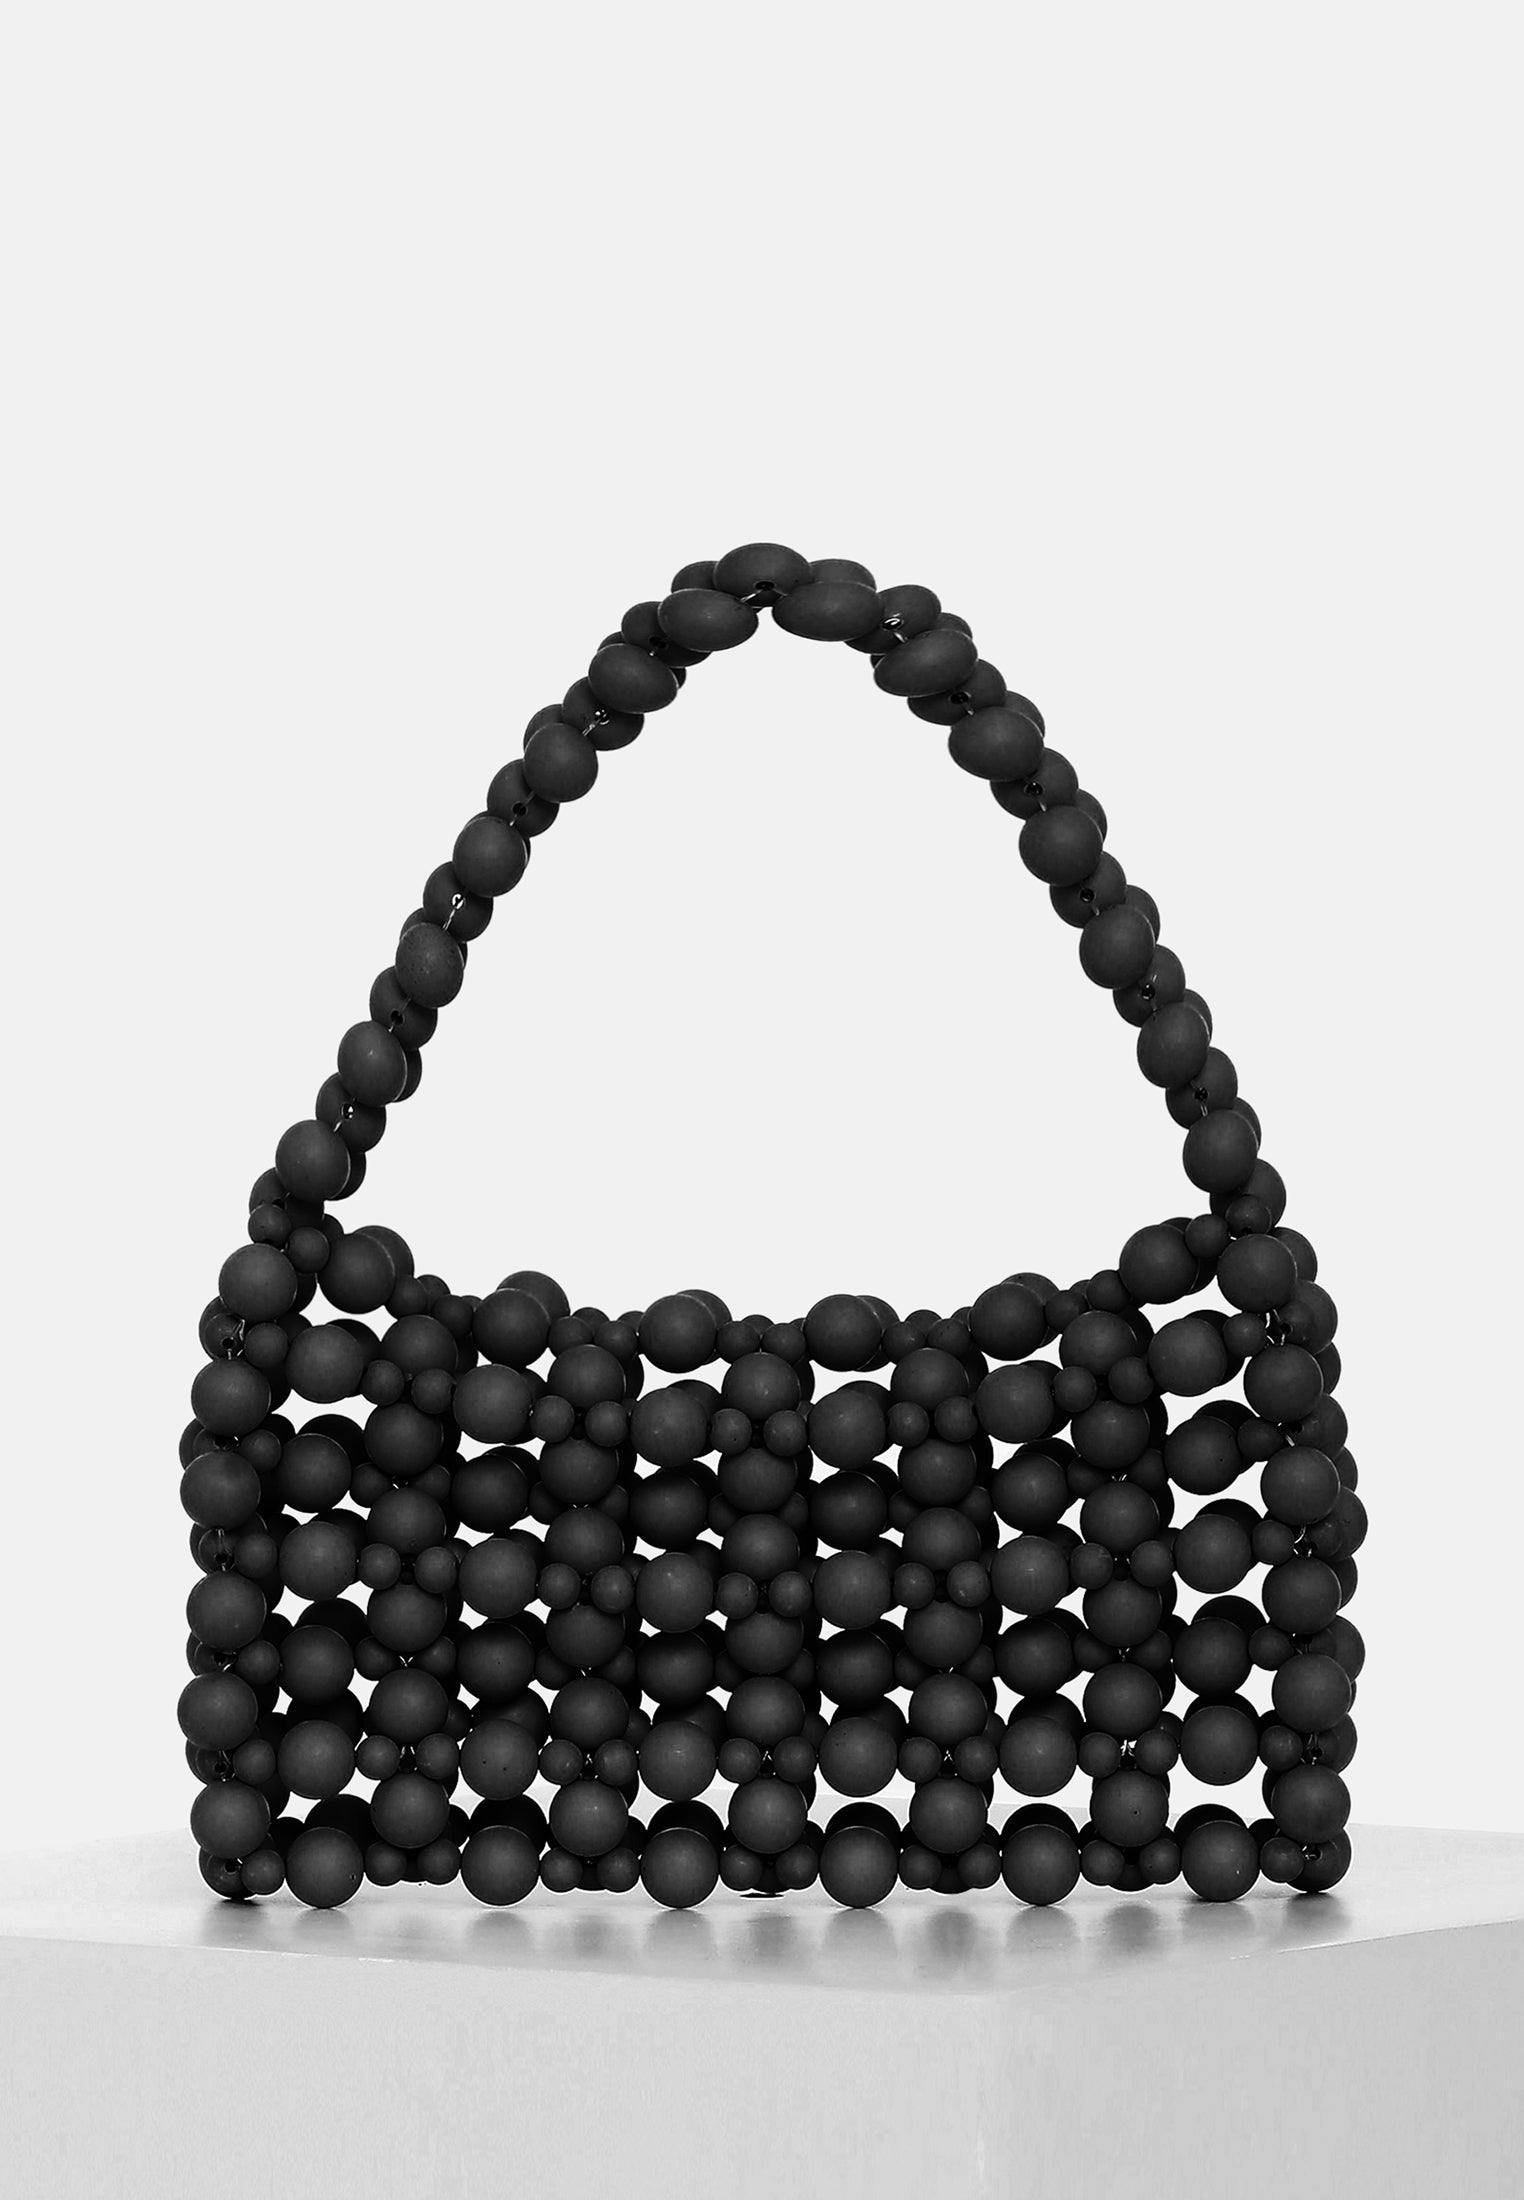 Eclipse Noir Beaded Mini Bag, a product by Lola's